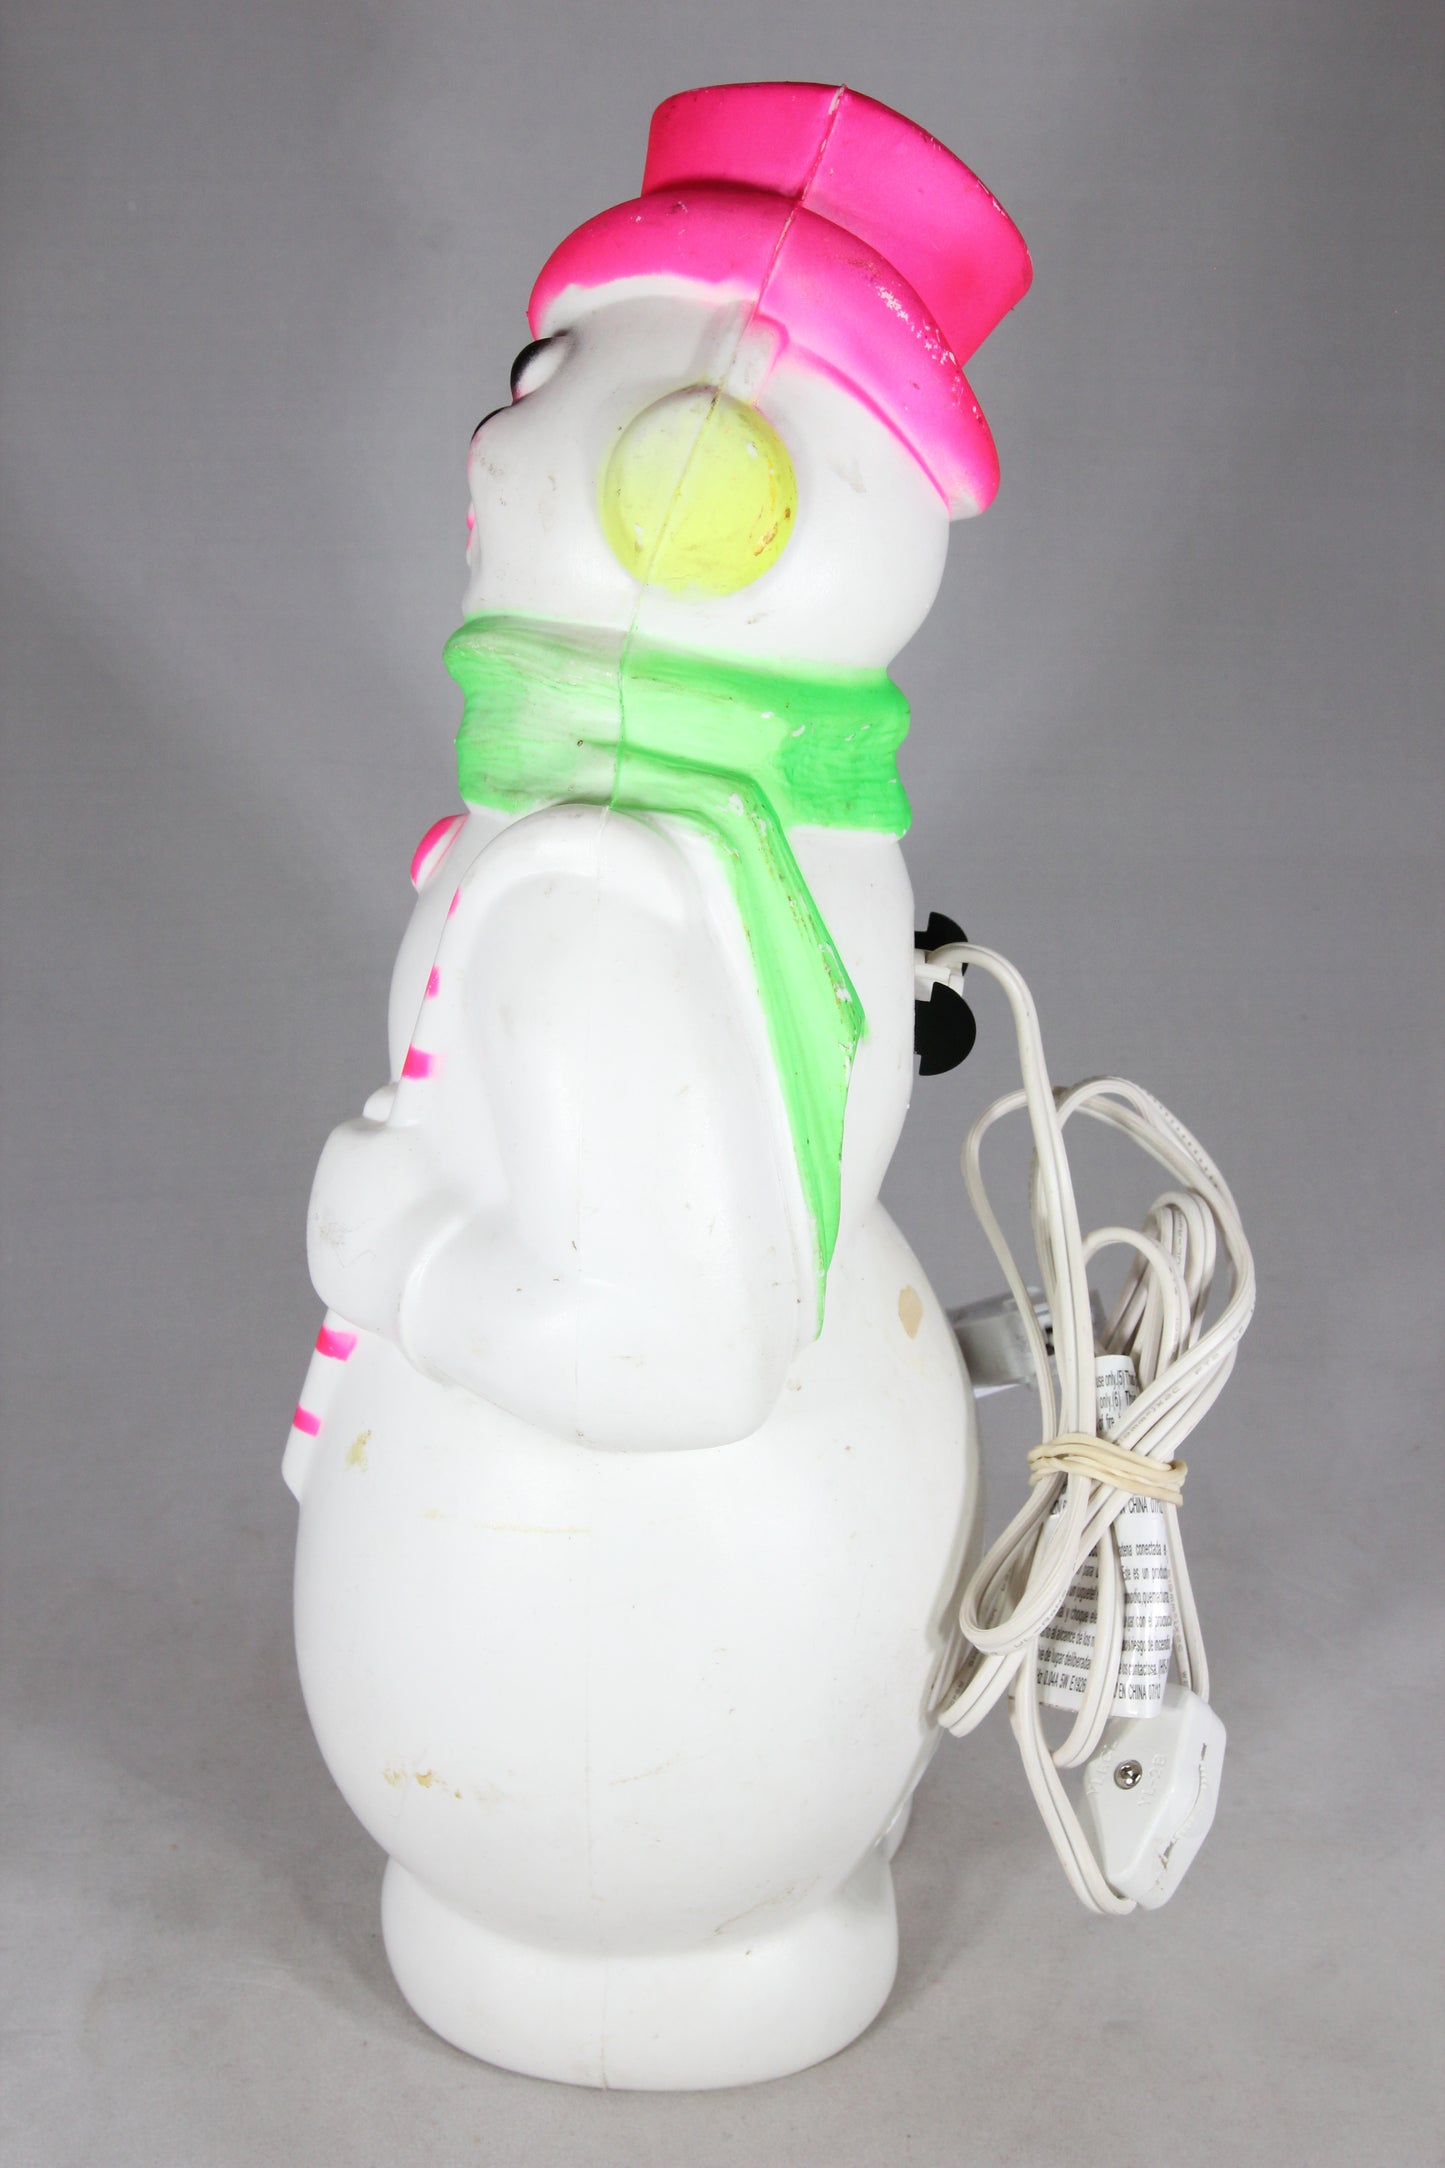 Snowman Light Up Blow Mold by Empire Plastic, 1968